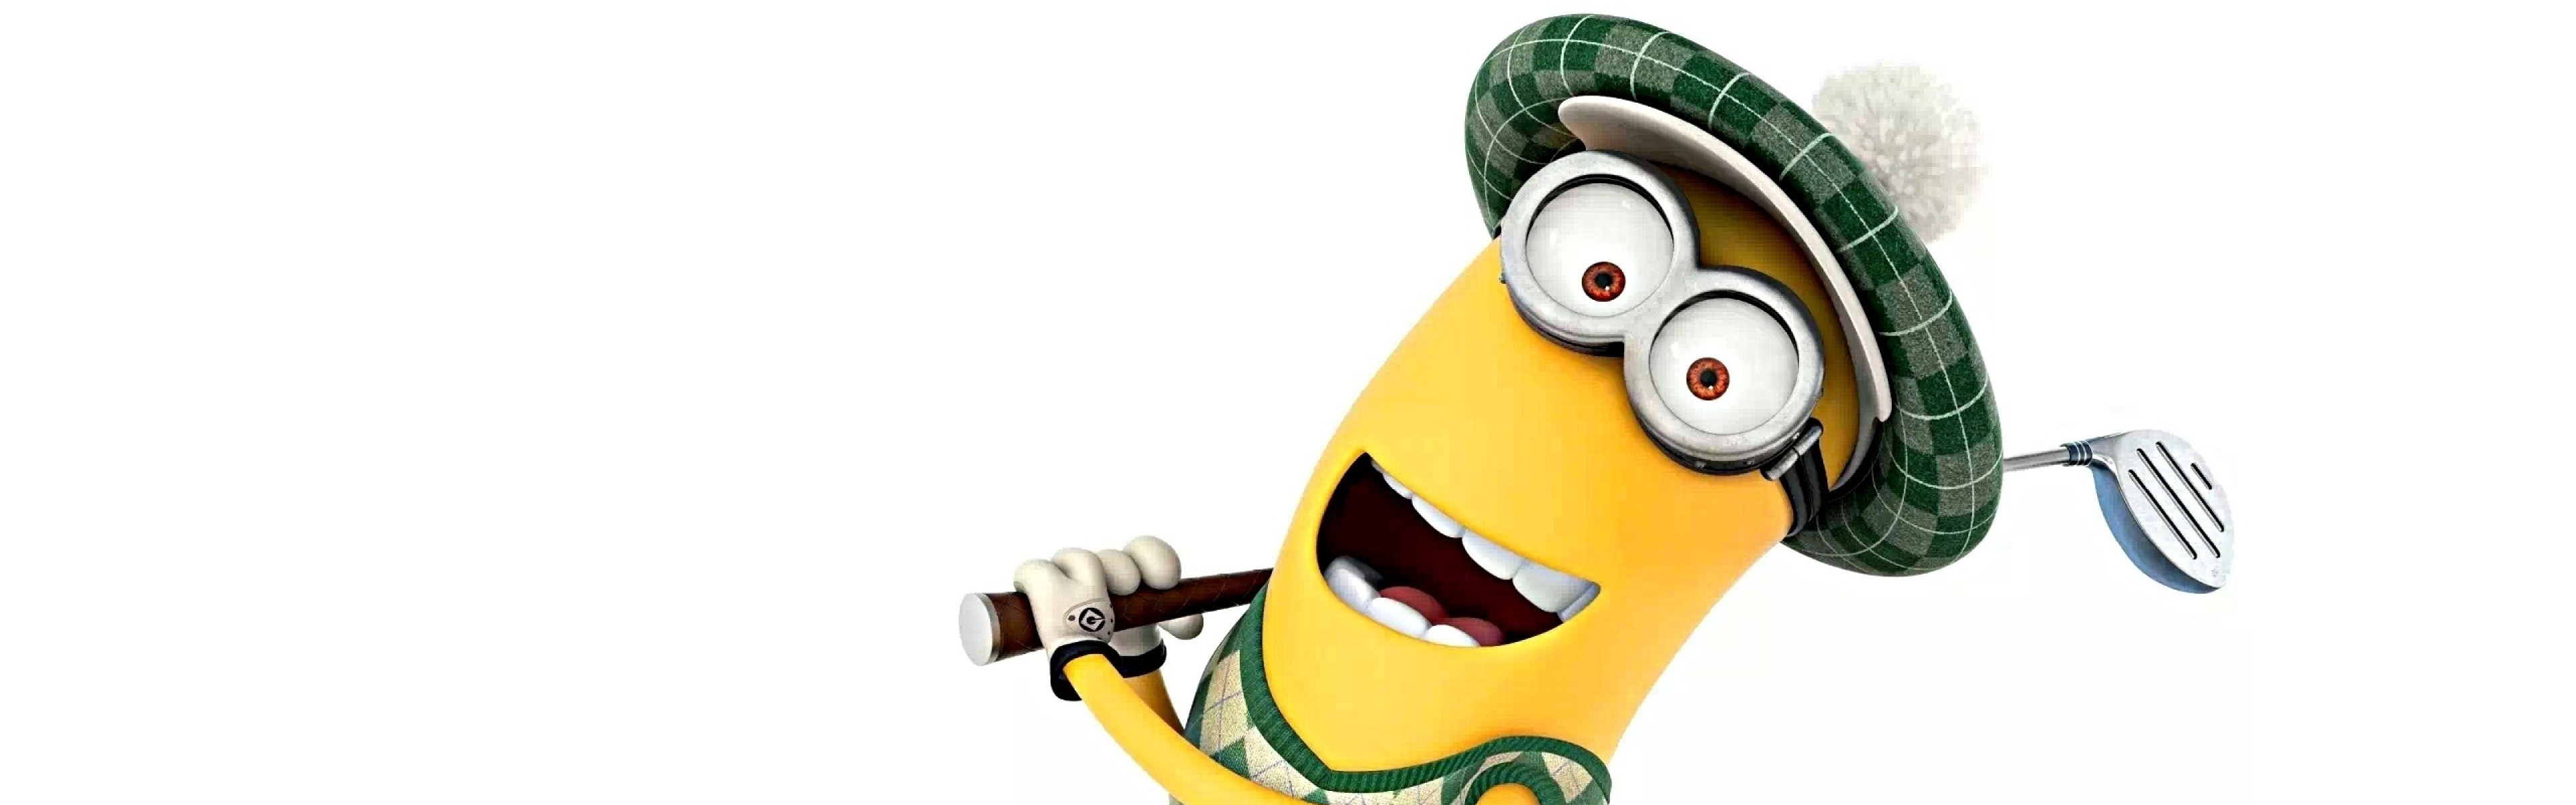 3840x1200  Wallpaper despicable me, minion, character